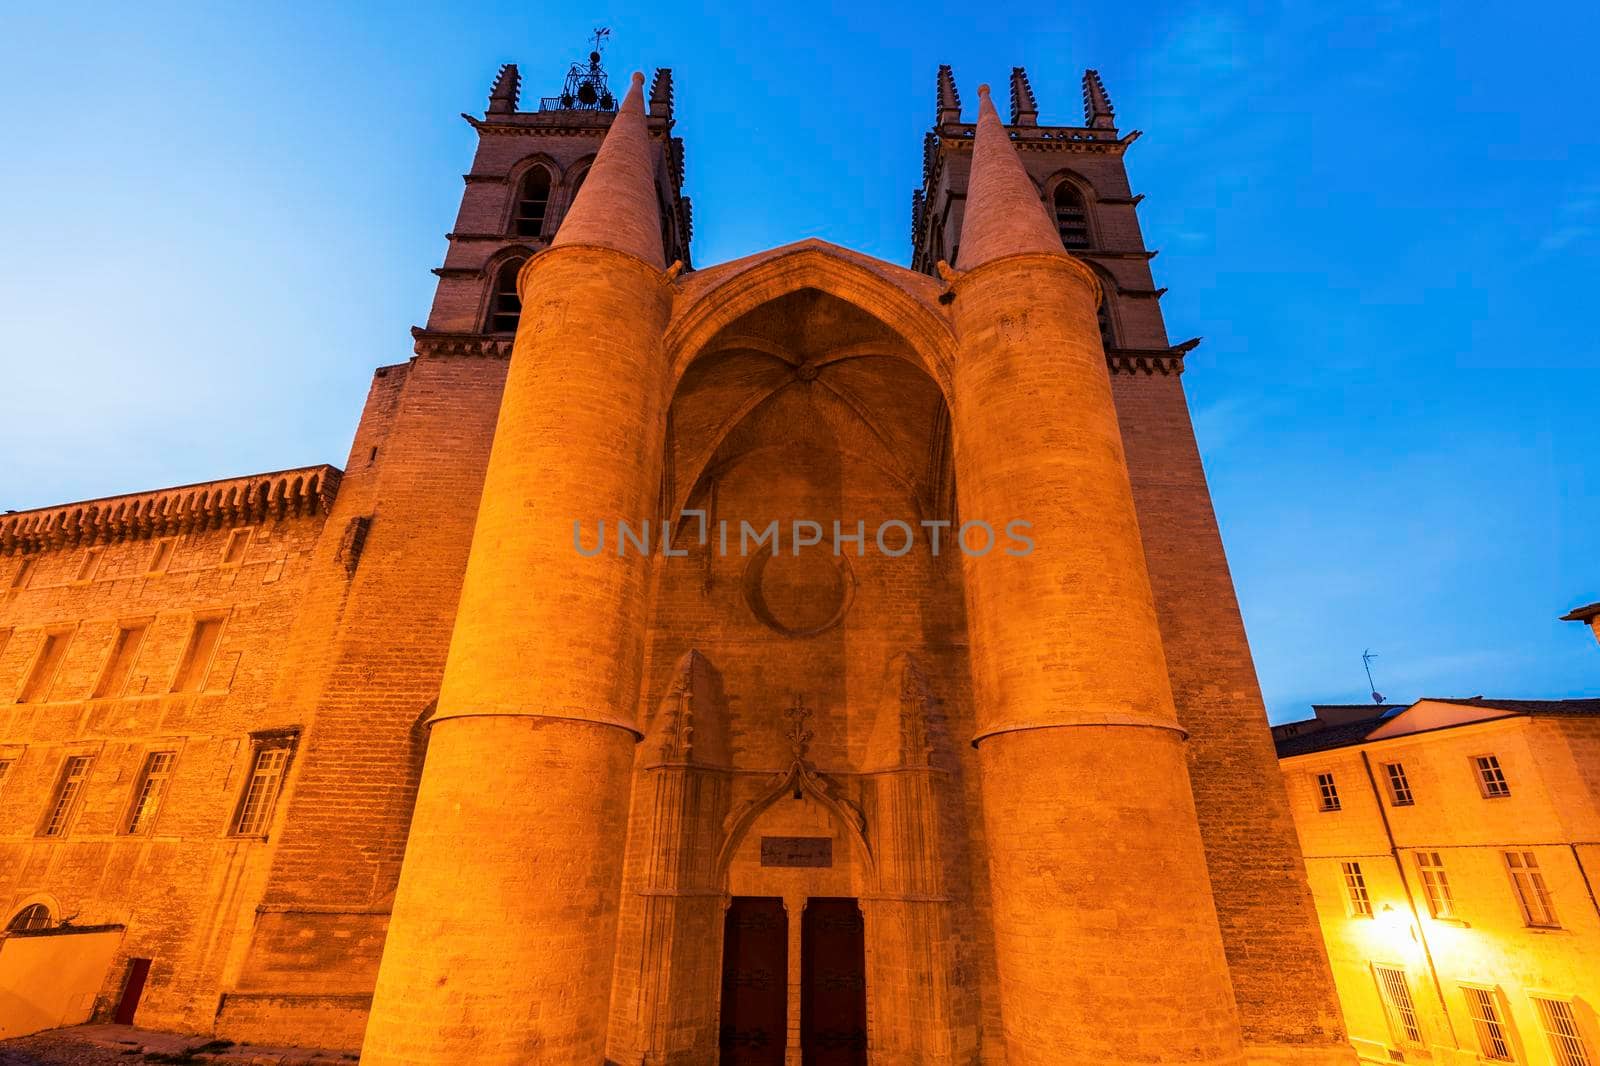 Montpellier Cathedral at sunset. Montpellier, Occitanie, France.